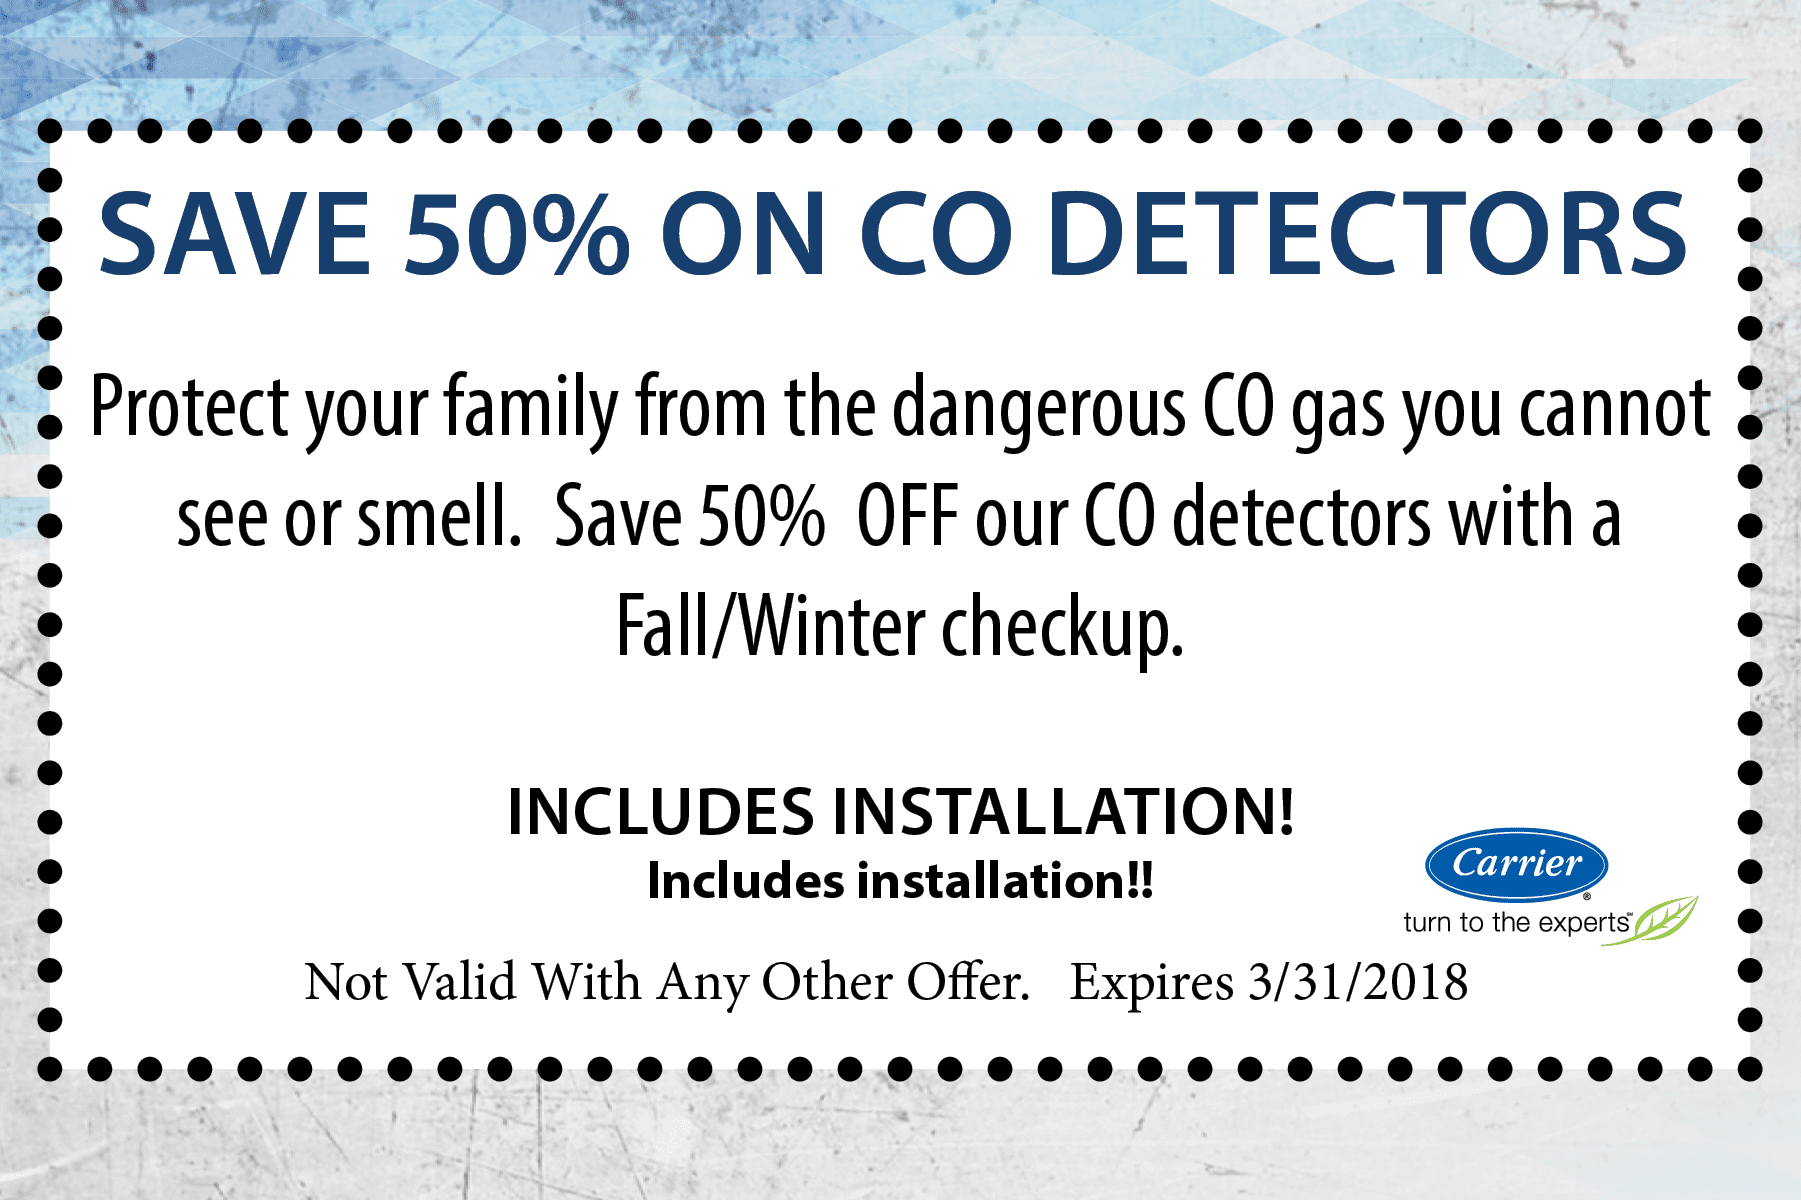 save 50% on co detector includes insatllation offer by carrier